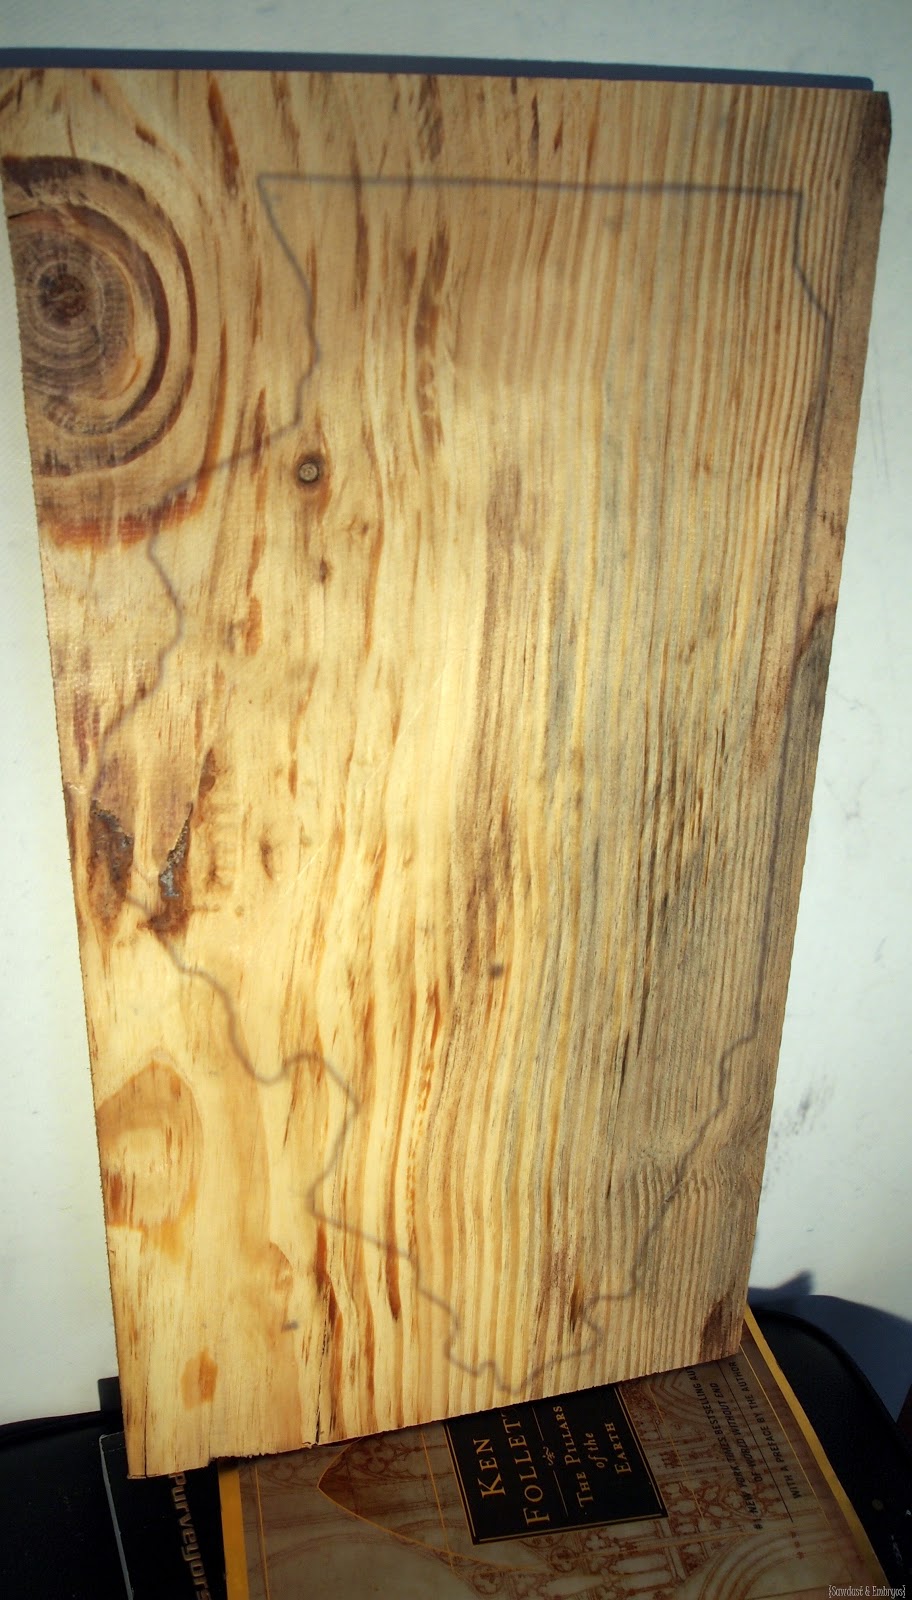 [DIY%2520State%2520Plaque%2520%257E%2520Trace%2520the%2520state%2520onto%2520the%2520wood%2520using%2520an%2520overhead%2520projector%2521%2520%257BSawdust%2520and%2520Embryos%257D%255B5%255D.jpg]